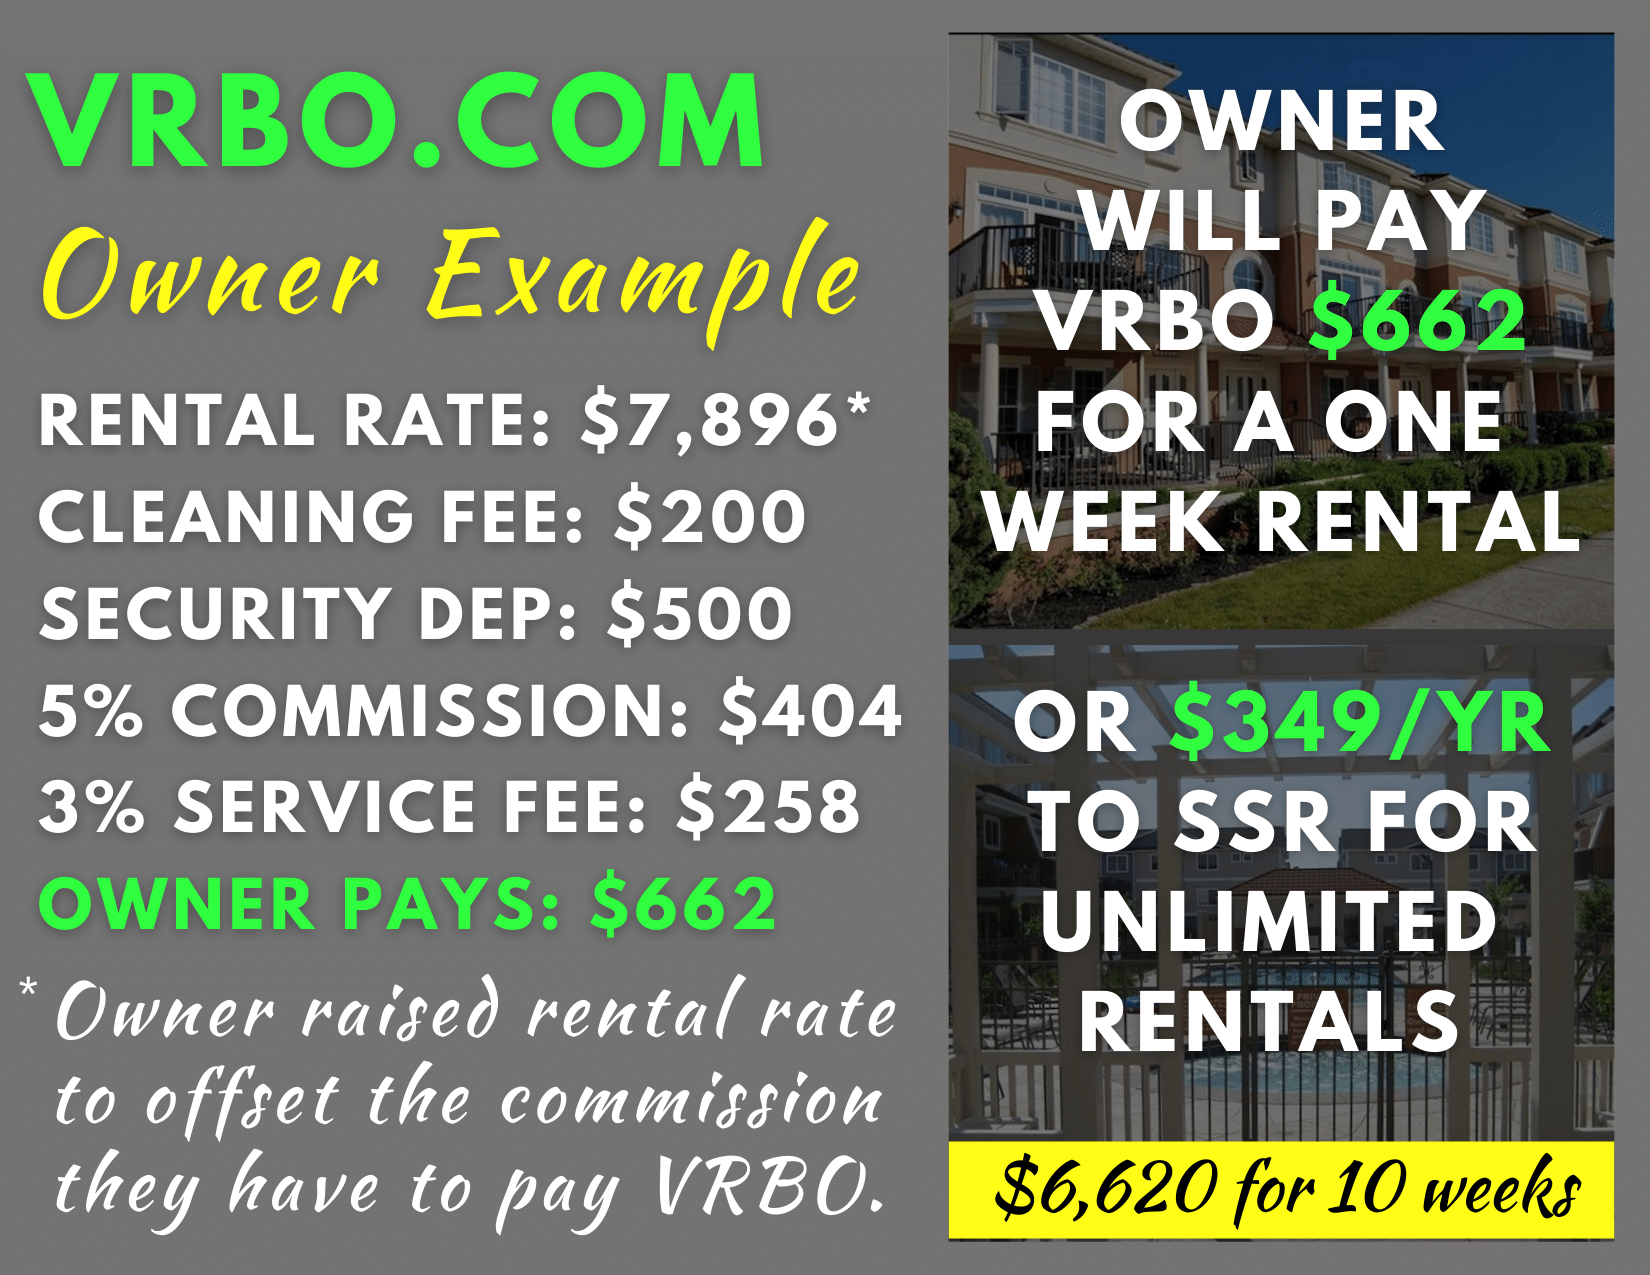 How to Avoid Airbnb and Vrbo Service Fees - Shoresummerrentals